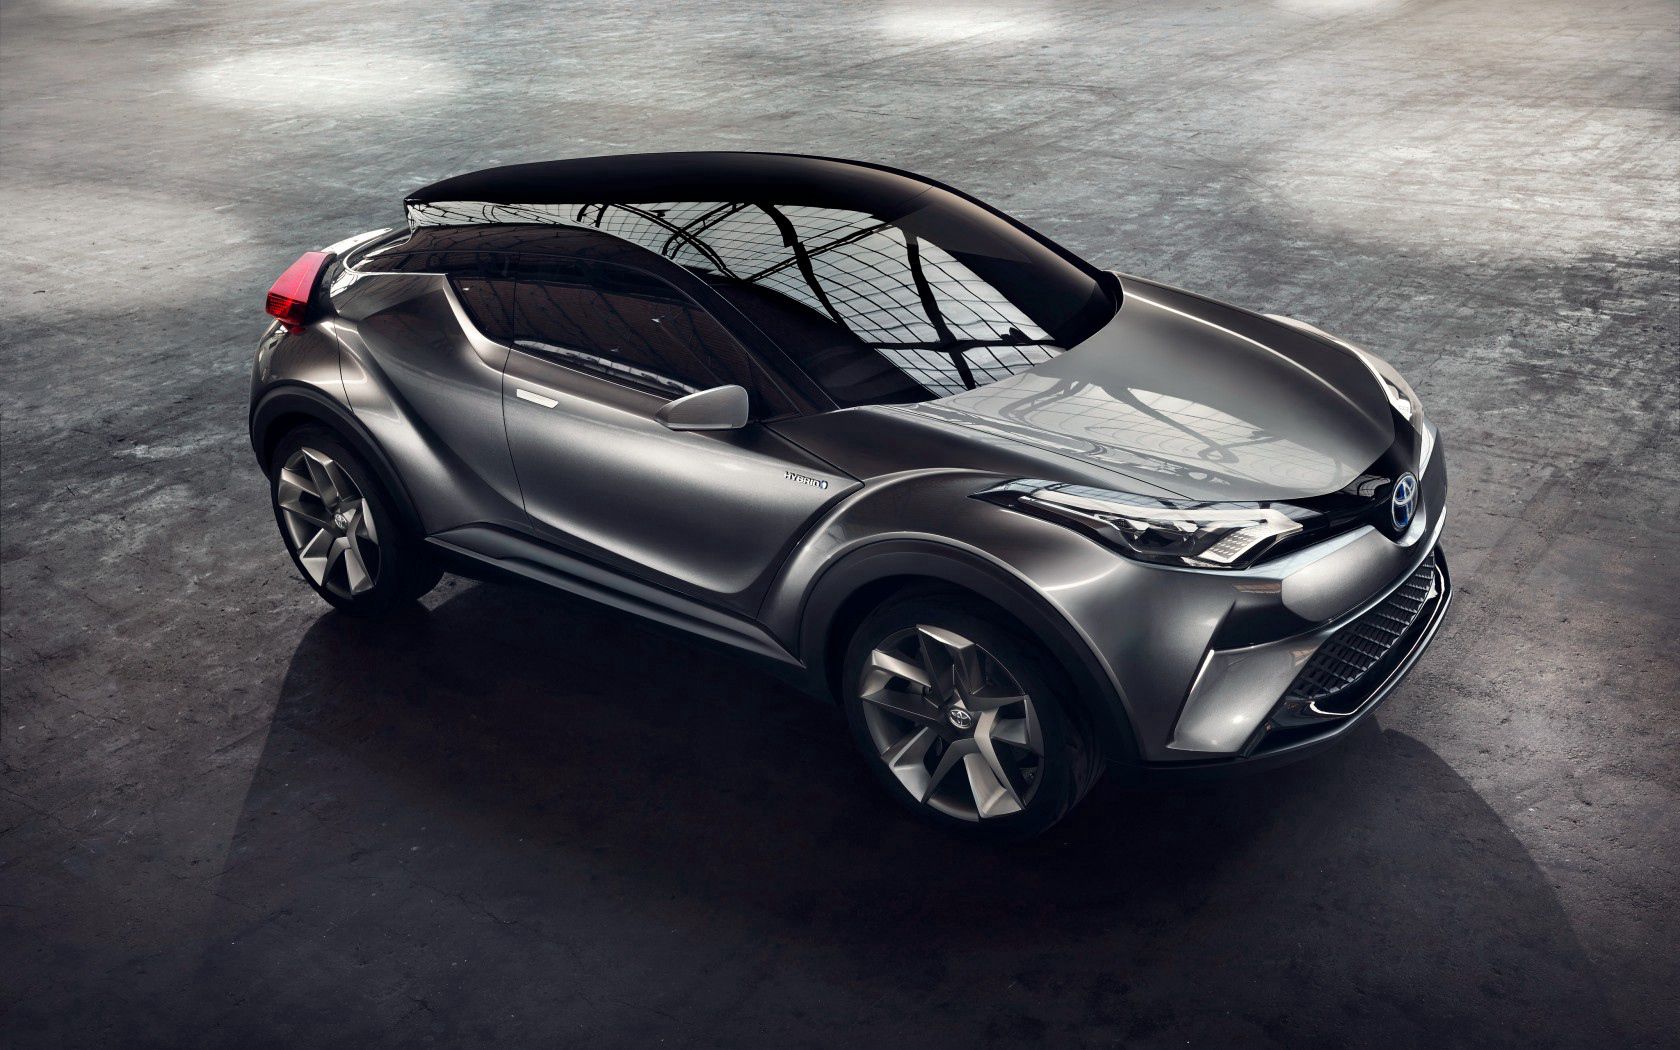 70445 download wallpaper toyota, cars, view from above, concept, c-hr screensavers and pictures for free